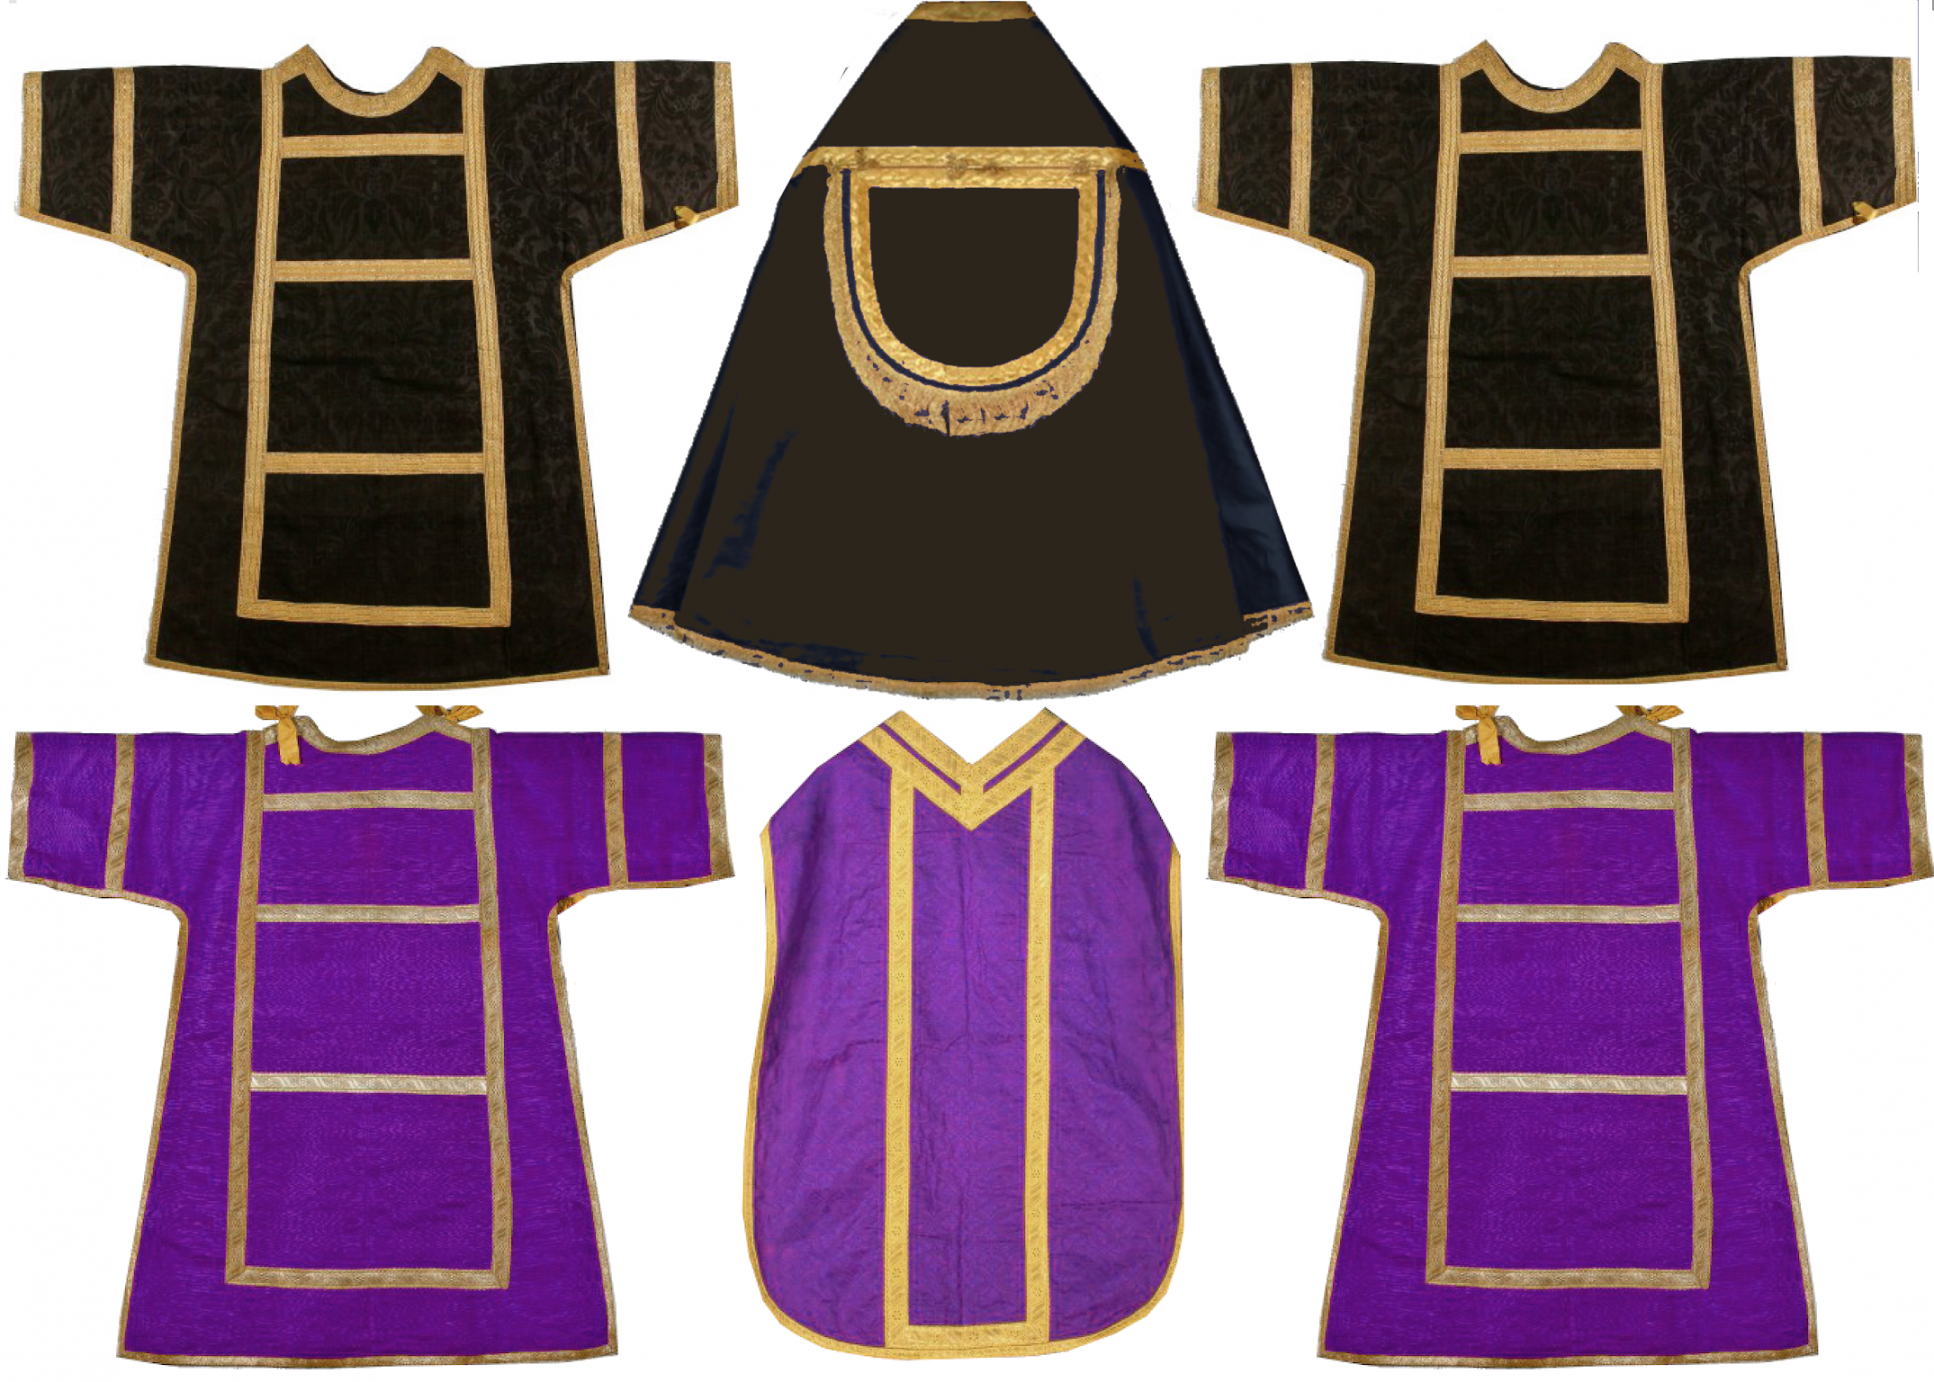 The Triduum: Variations in the Vestments and Their Colours in the